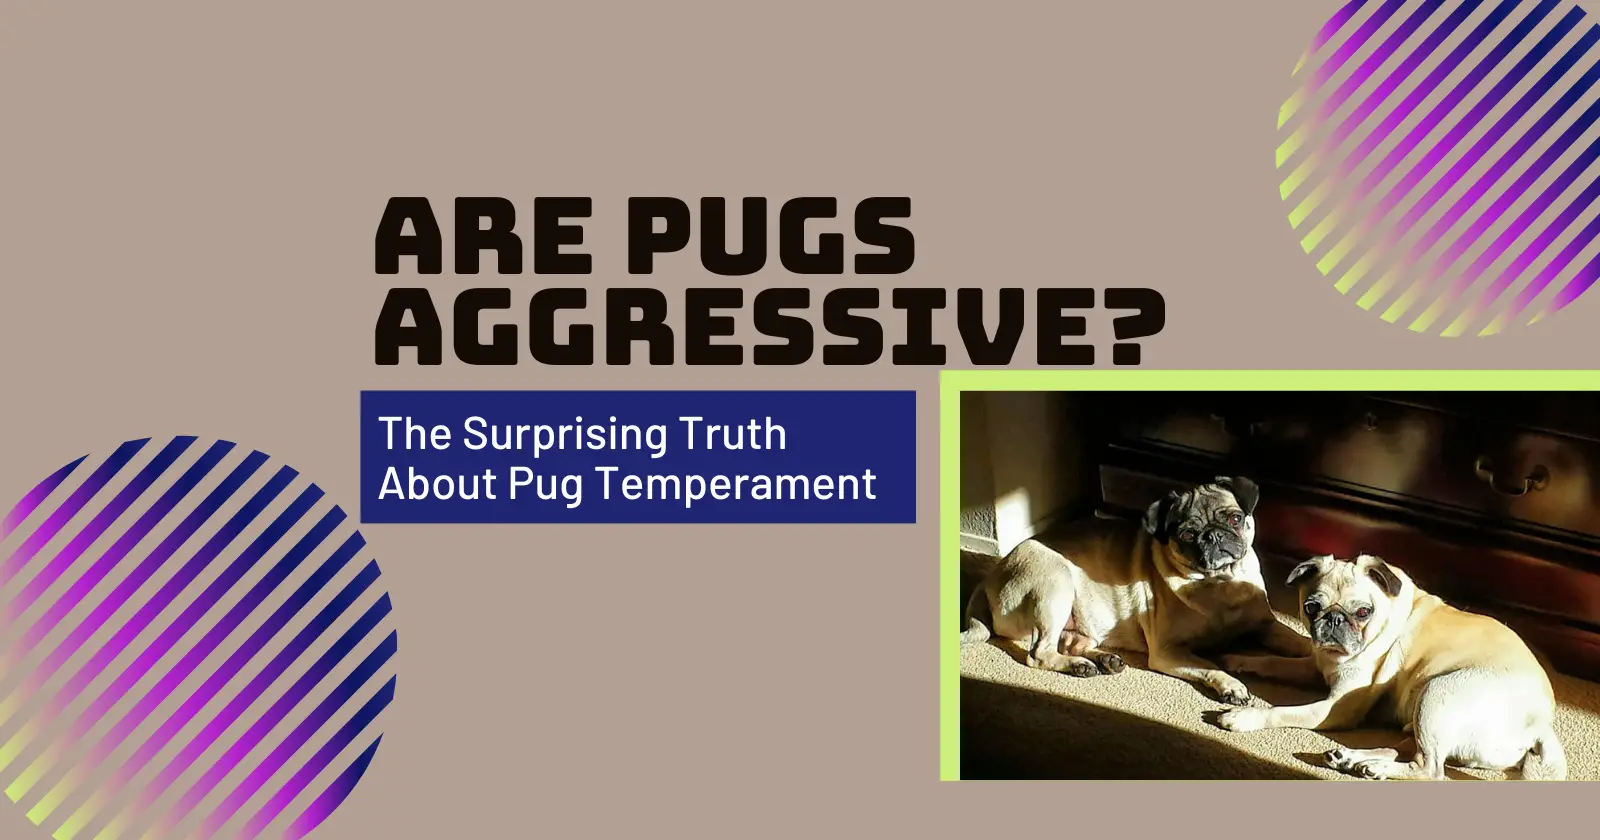 Are Pugs Aggressive? The Surprising Truth About Pug Temperament